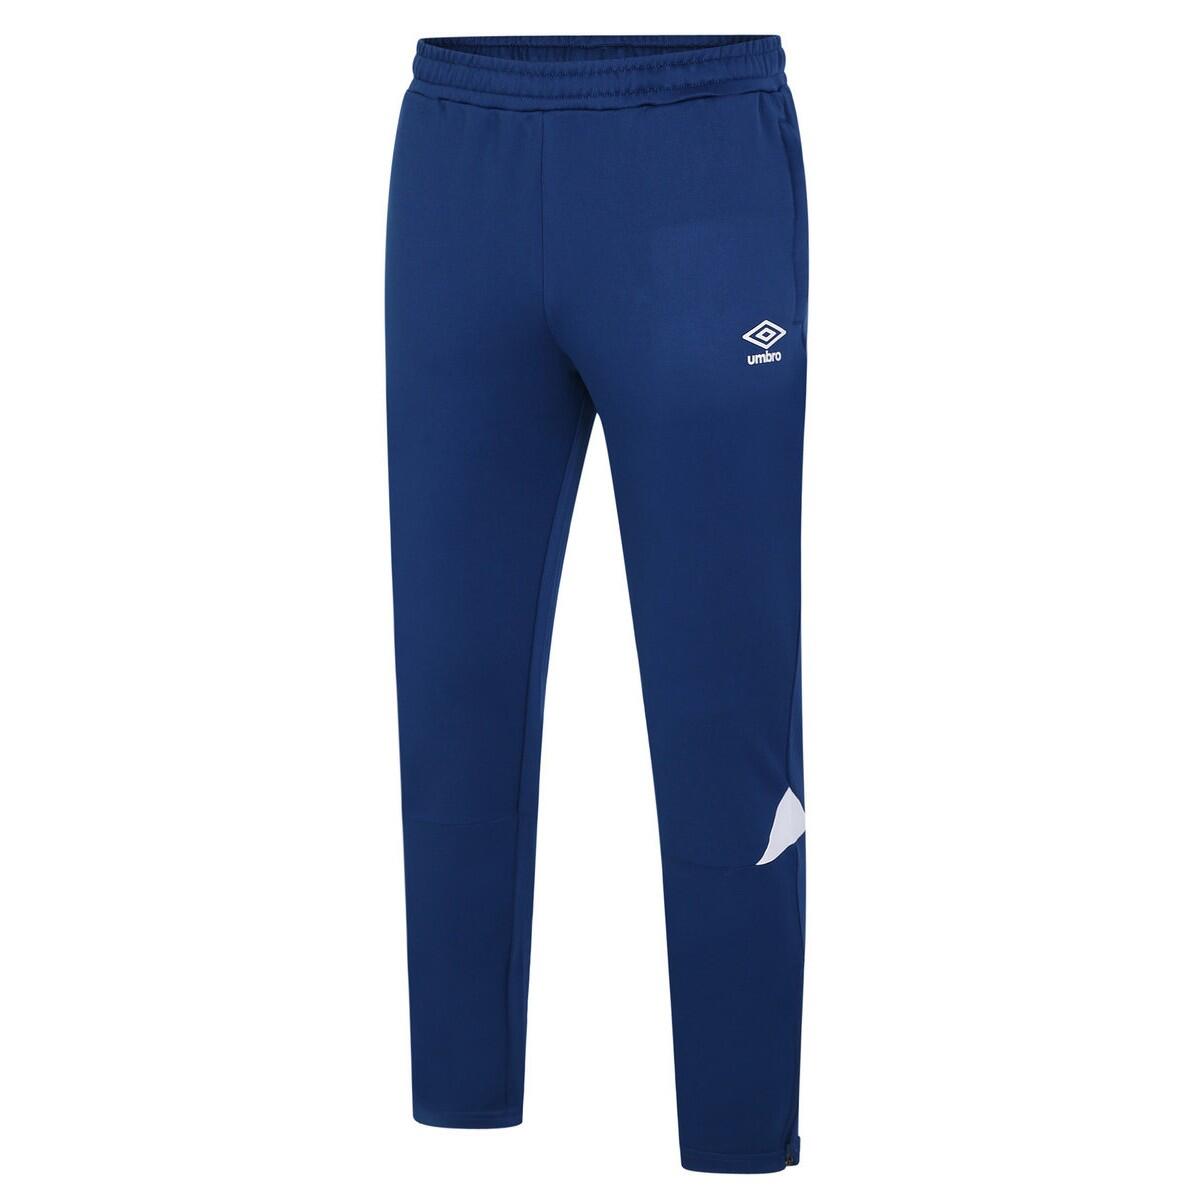 Mens Total Tapered Training Jogging Bottoms (Navy/White) 1/3